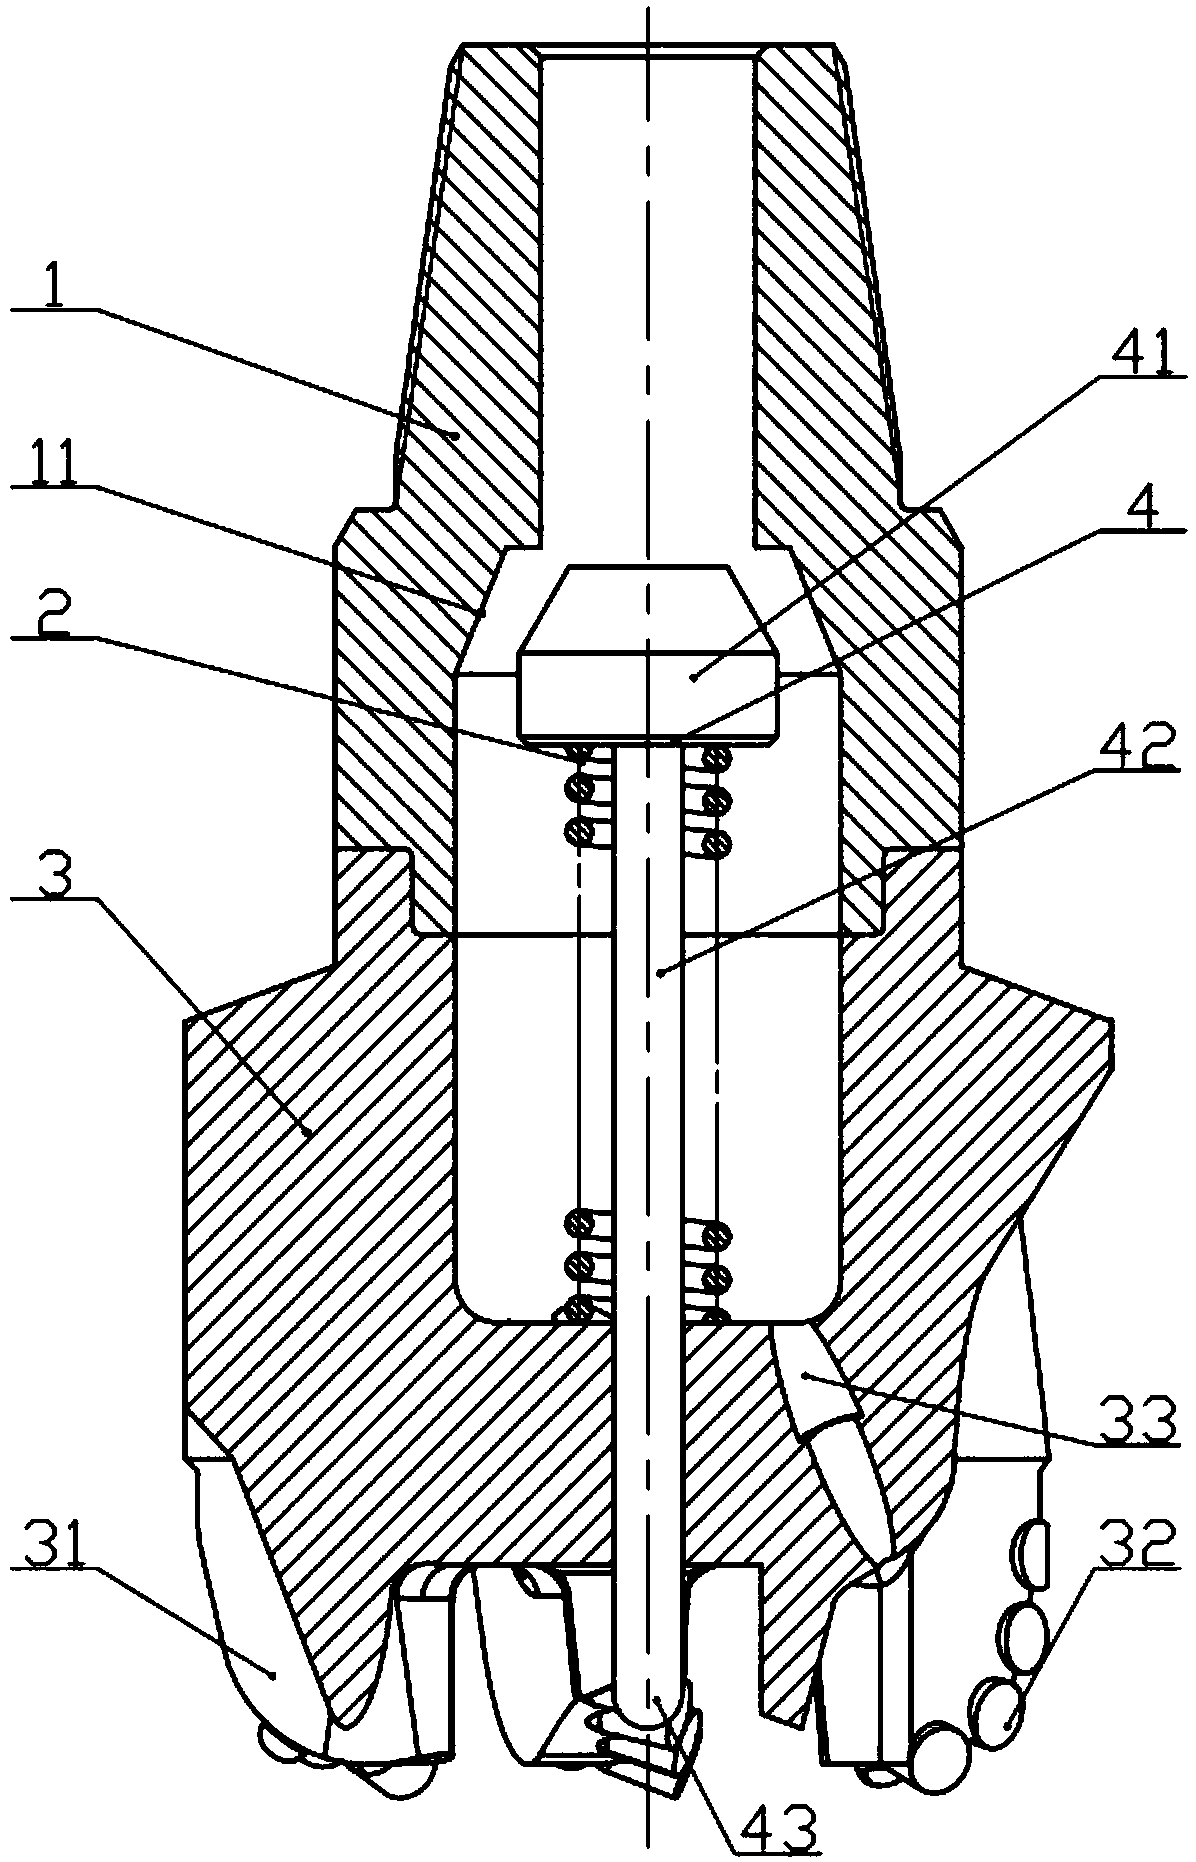 Rock breaking speed-increasing tool with hammer rod reciprocating self-impact structure